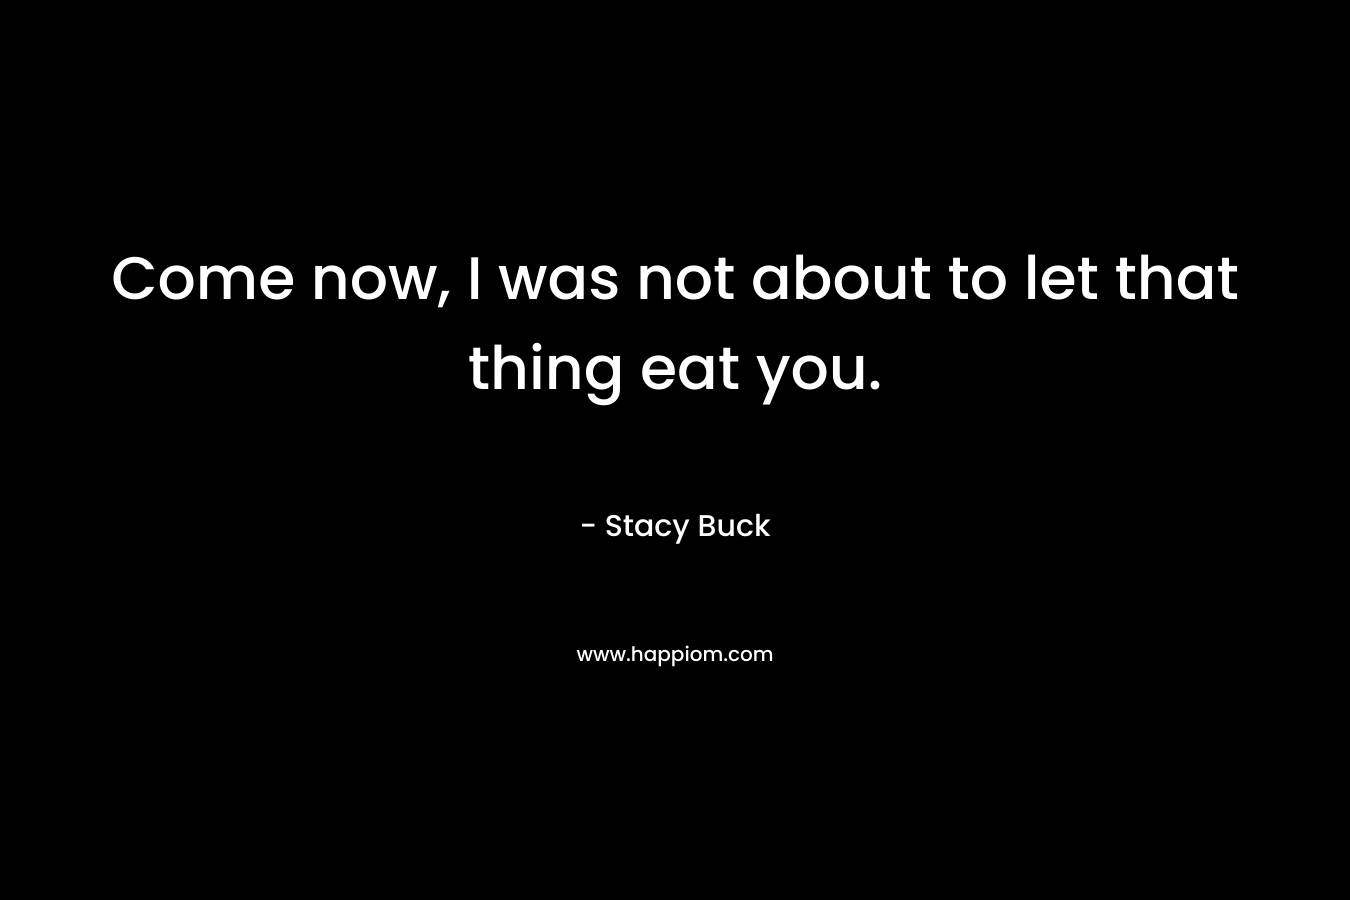 Come now, I was not about to let that thing eat you. – Stacy Buck